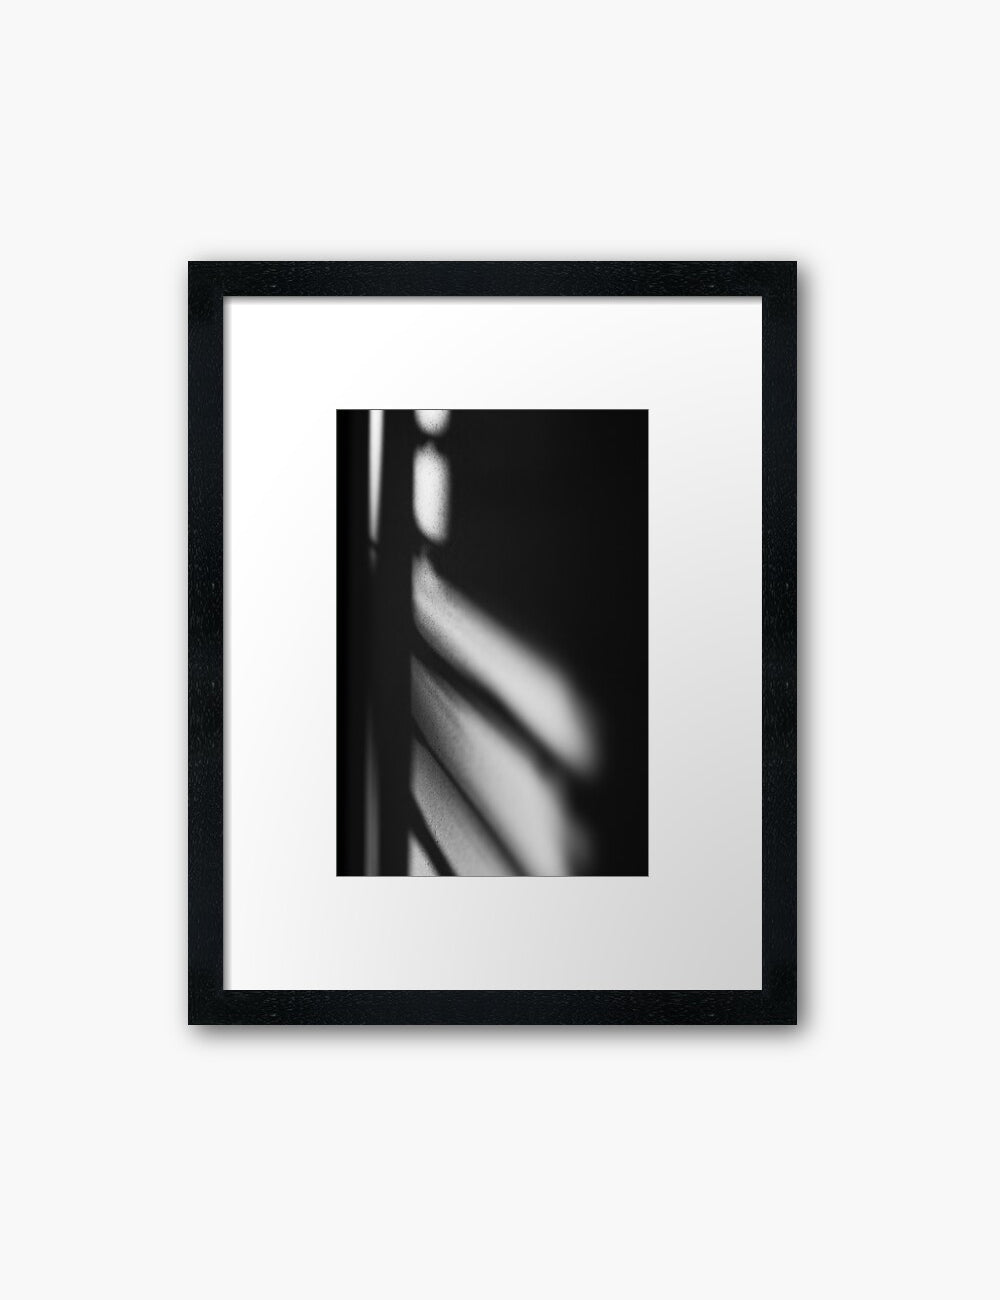 LIGHT AND SHADOW. Black and white photography. Abstract, minimalist printable wall art. - PAPER MOON Art & Design